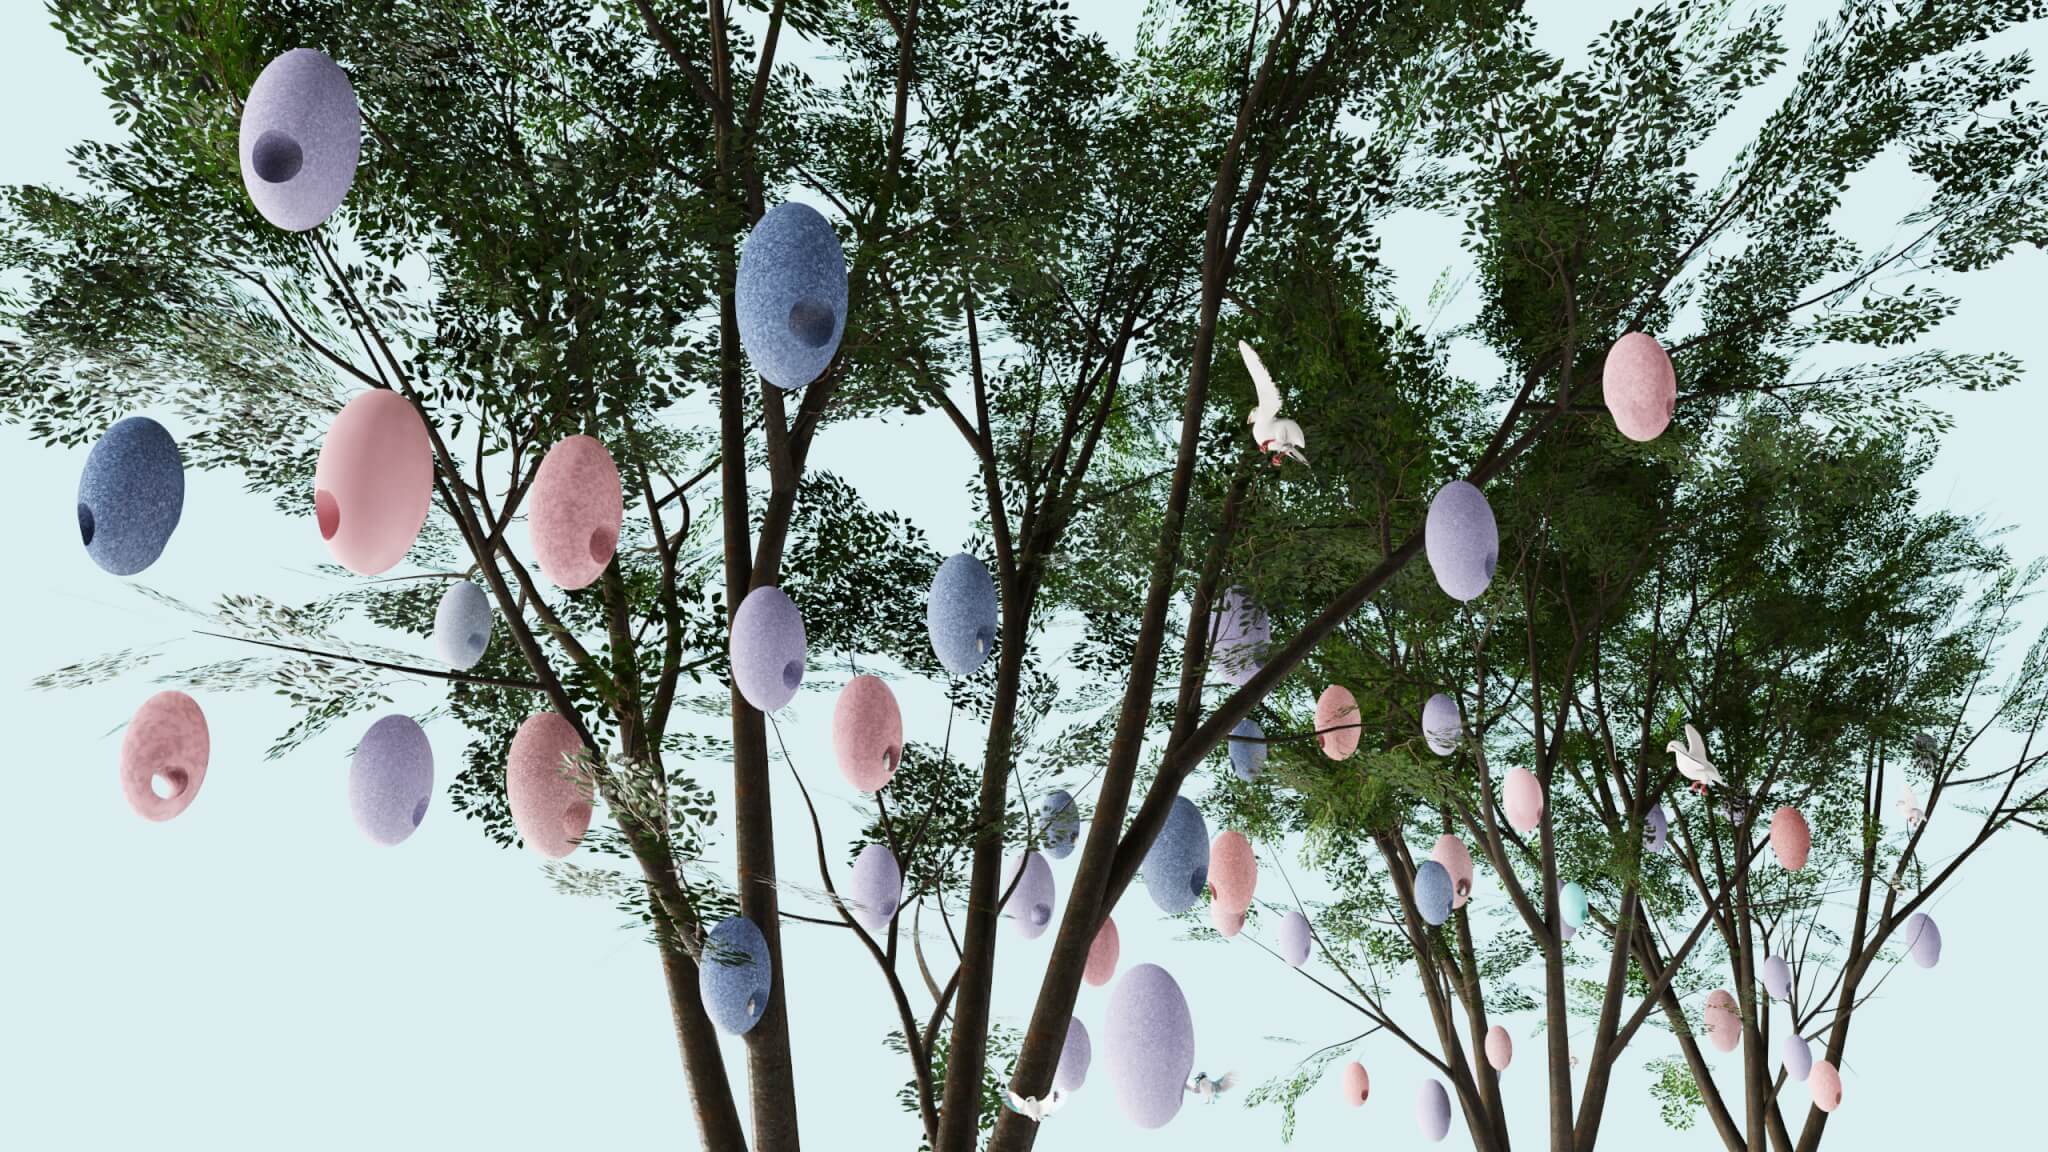 Egg-shaped bridhouses scattered across trees in colorful hues.